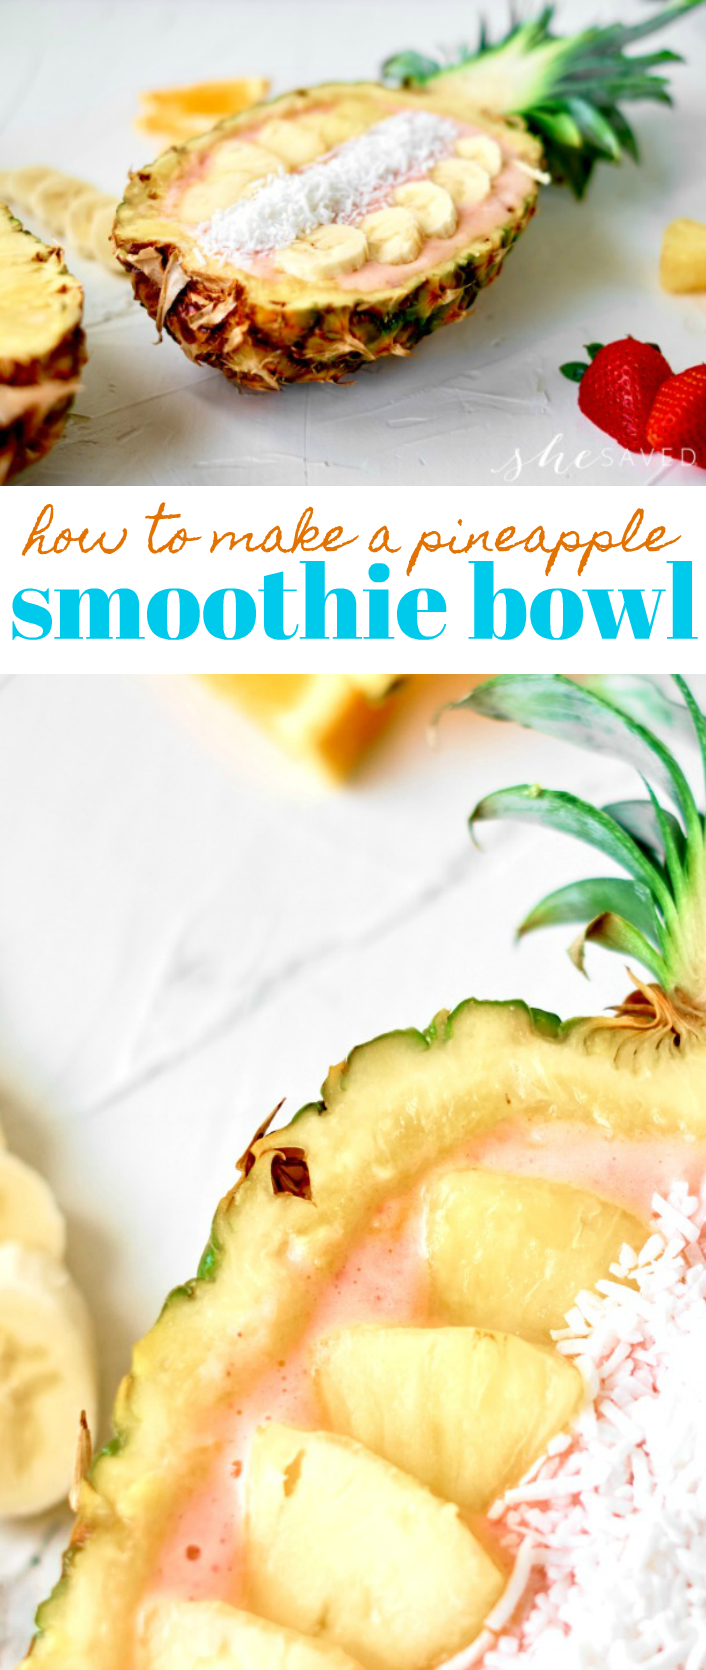 How to Make a Pineapple Smoothie Bowl